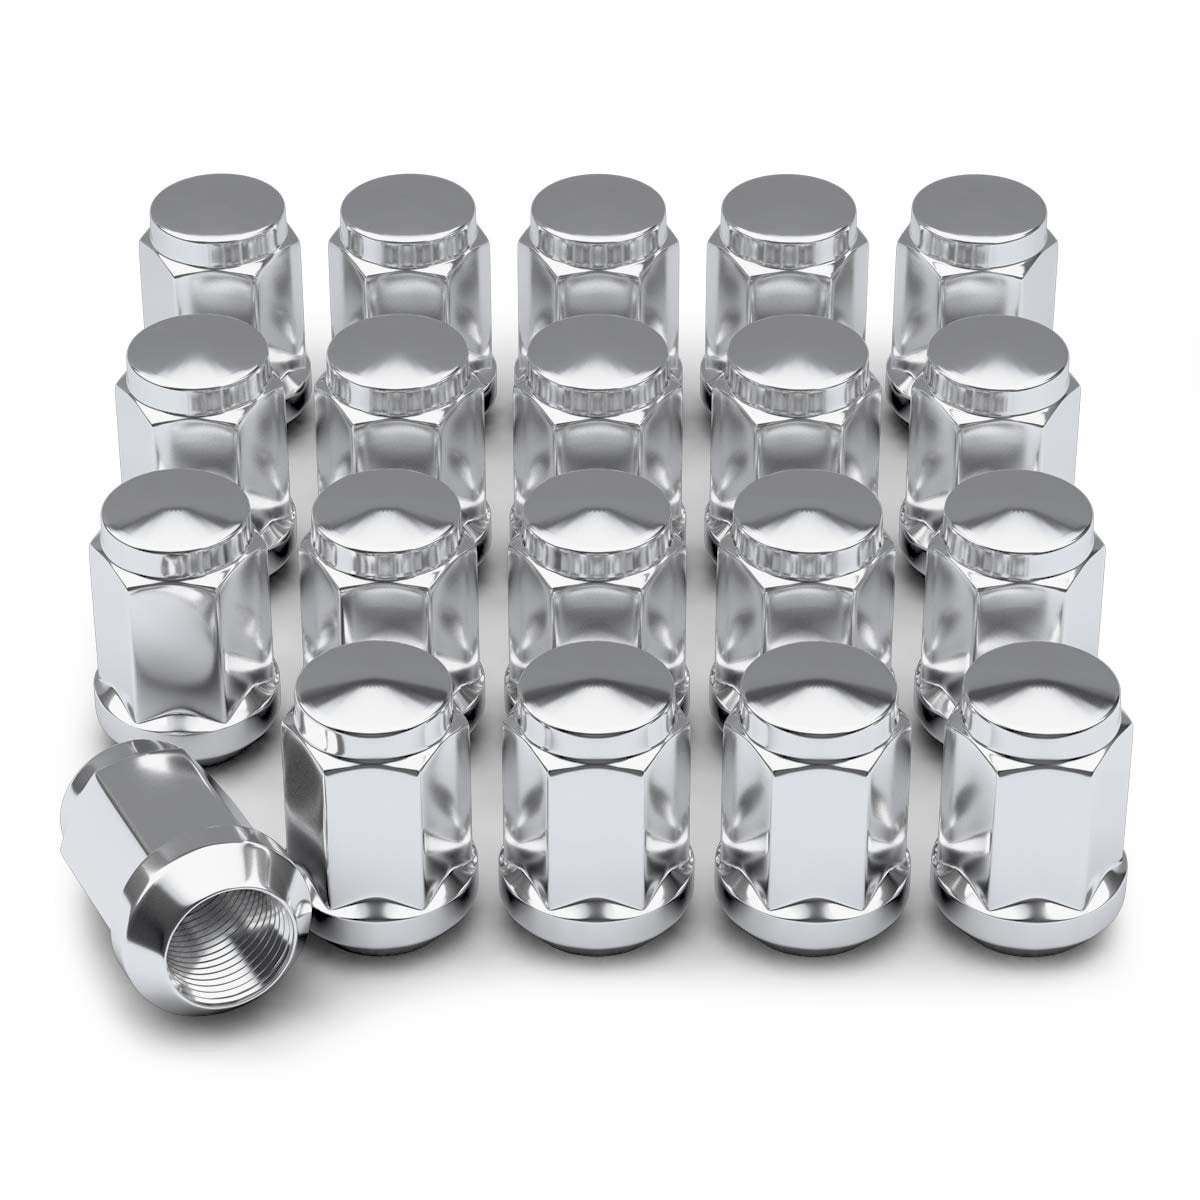 Buyer Needs to Review The spec 20pcs Chrome 1/2-20 UNF Wheel Lug Nuts fit 1996 Dodge Ram 1500 Van May Fit OEM Rims